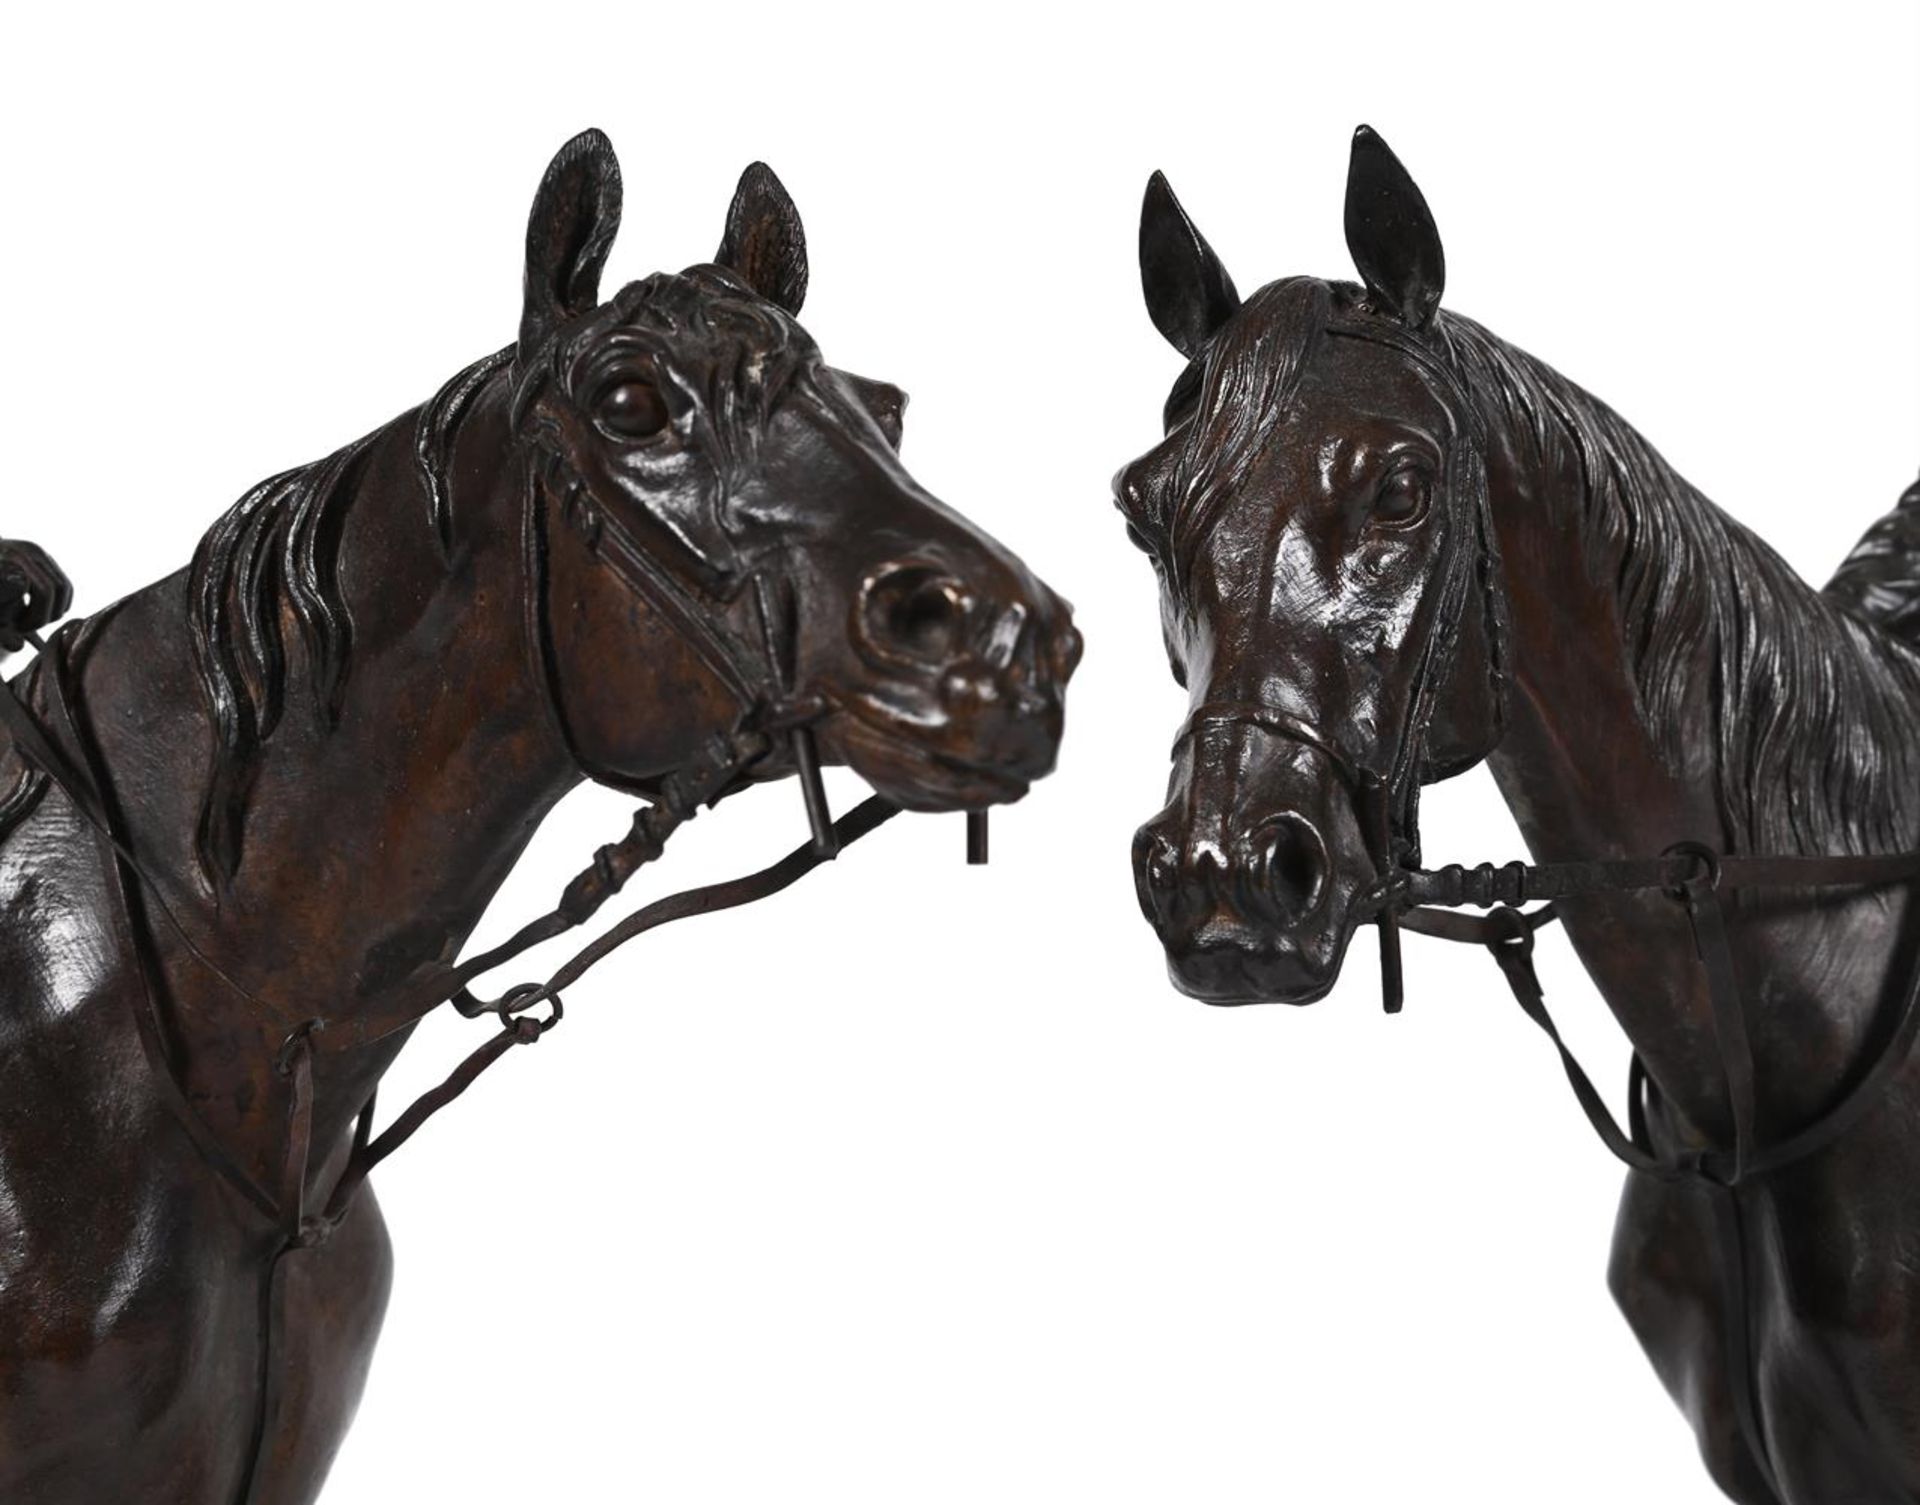 AFTER JULES MOIGNIEZ (1835-1894), A PAIR OF BRONZE EQUESTRIAN GROUPS, FRENCH, LATE 19TH CENTURY - Image 4 of 7